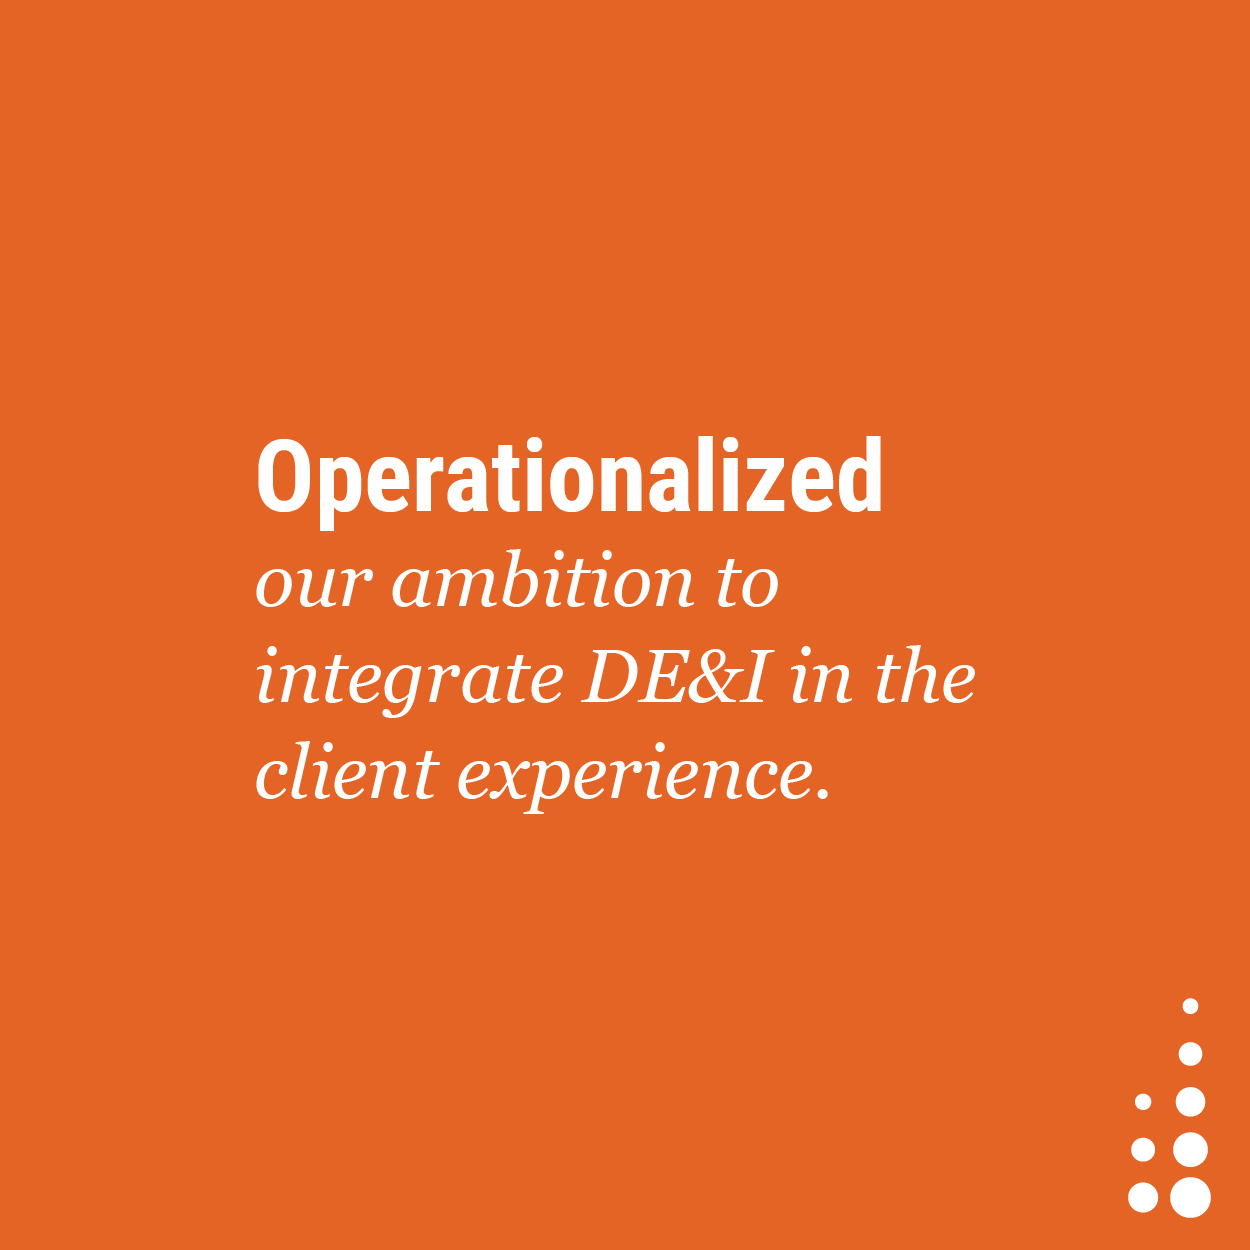 Operationalized our ambition to integrate DE&I in the client experience.